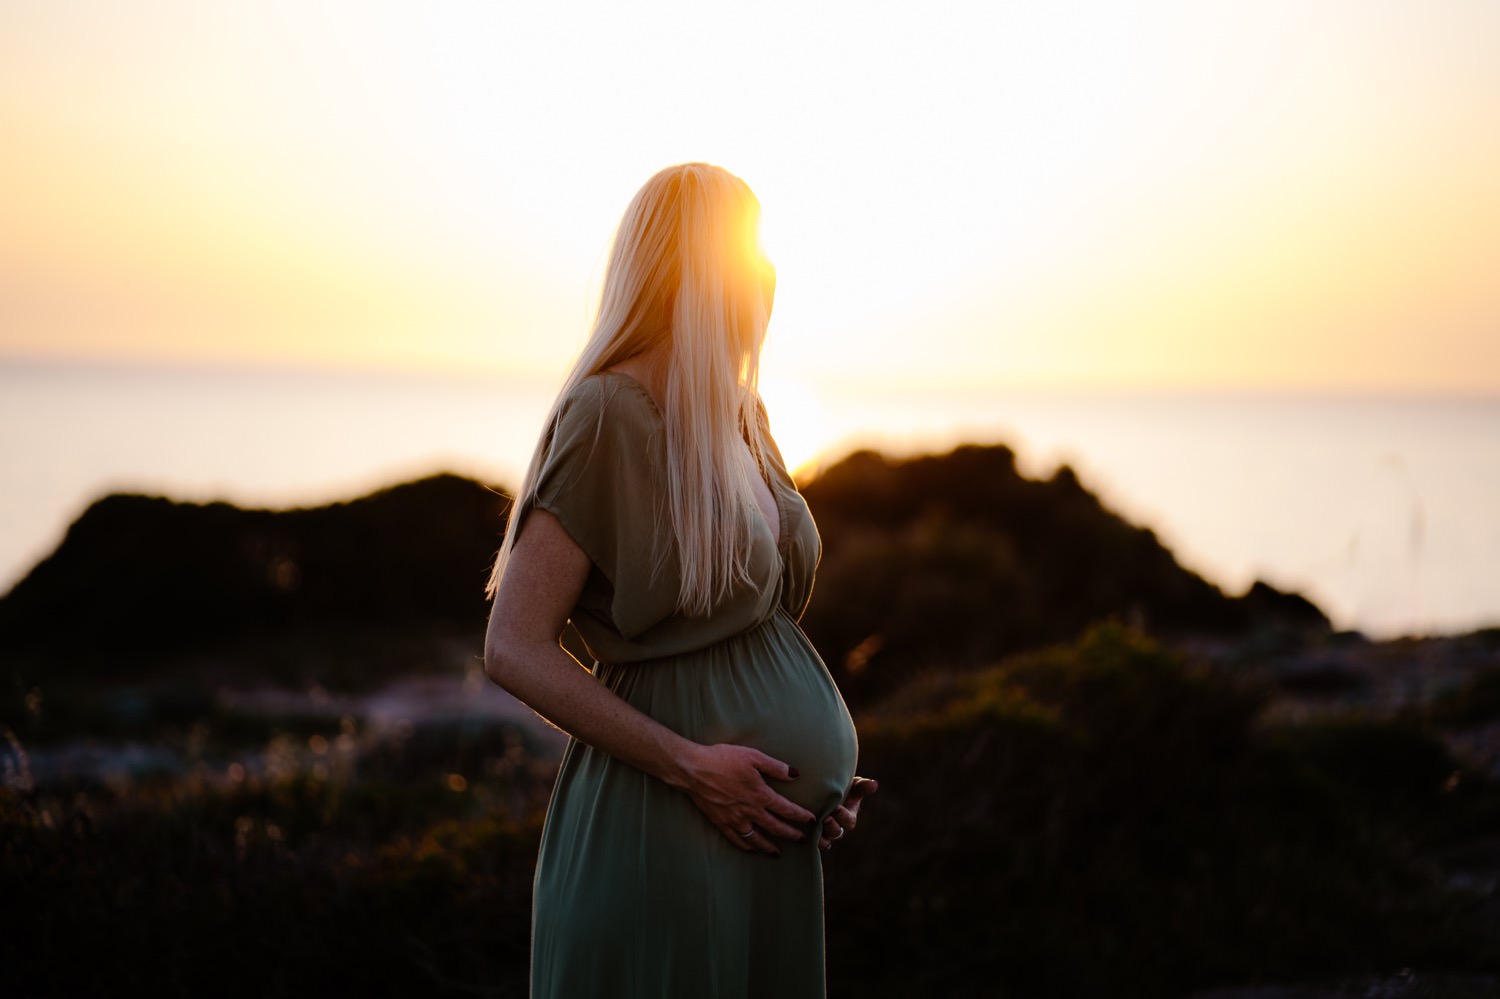 A beautiful maternity photo taken in the charming town of Alghero. The mother-to-be is standing in front of a colorful building with her hands on her belly, smiling at the camera.